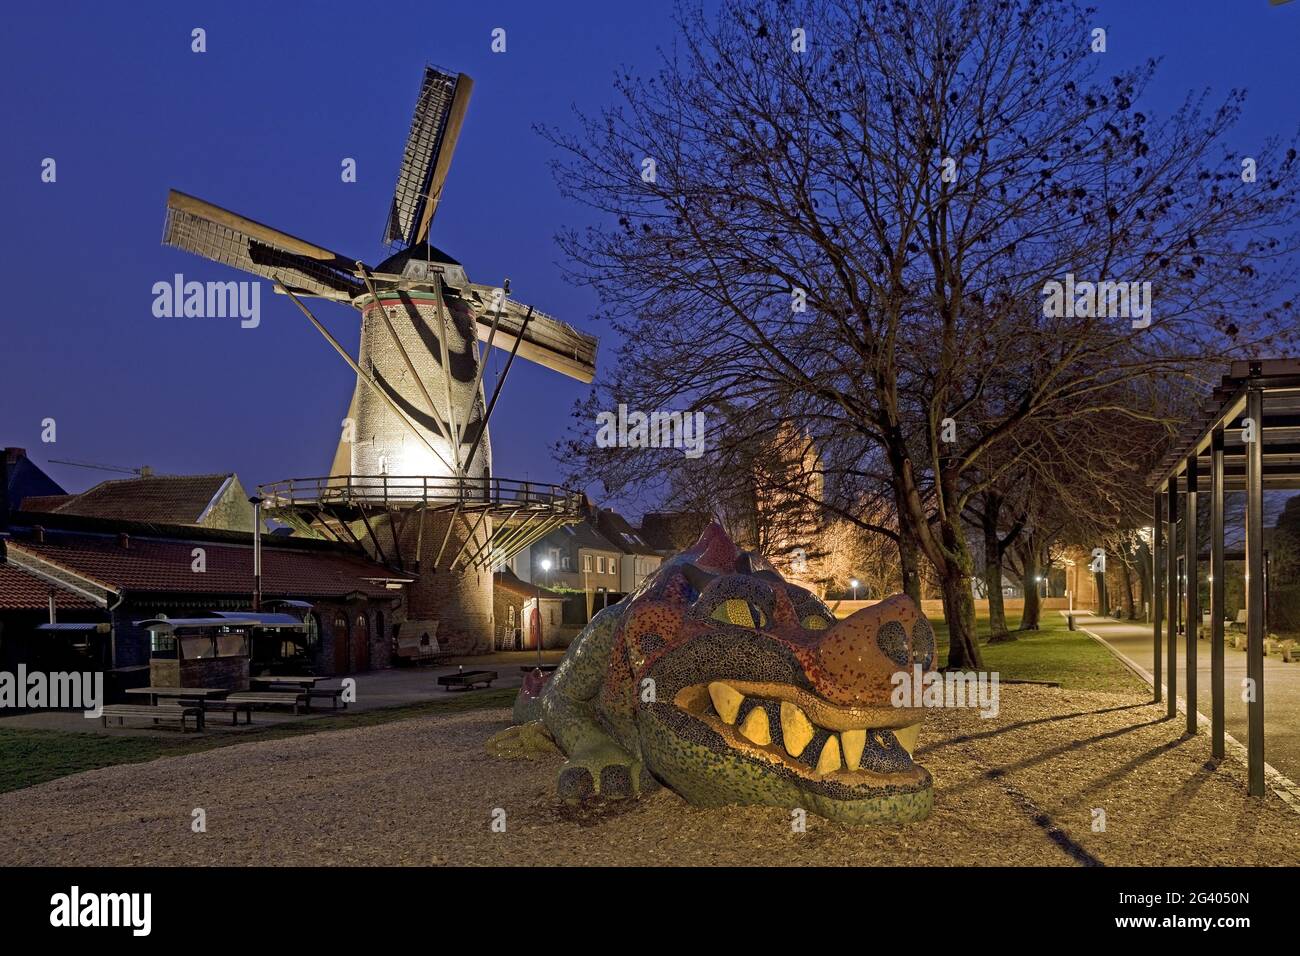 Kriemhild mill with Nibelungen dragon in the evening, Xanten, Lower Rhine, Germany, Europe Stock Photo